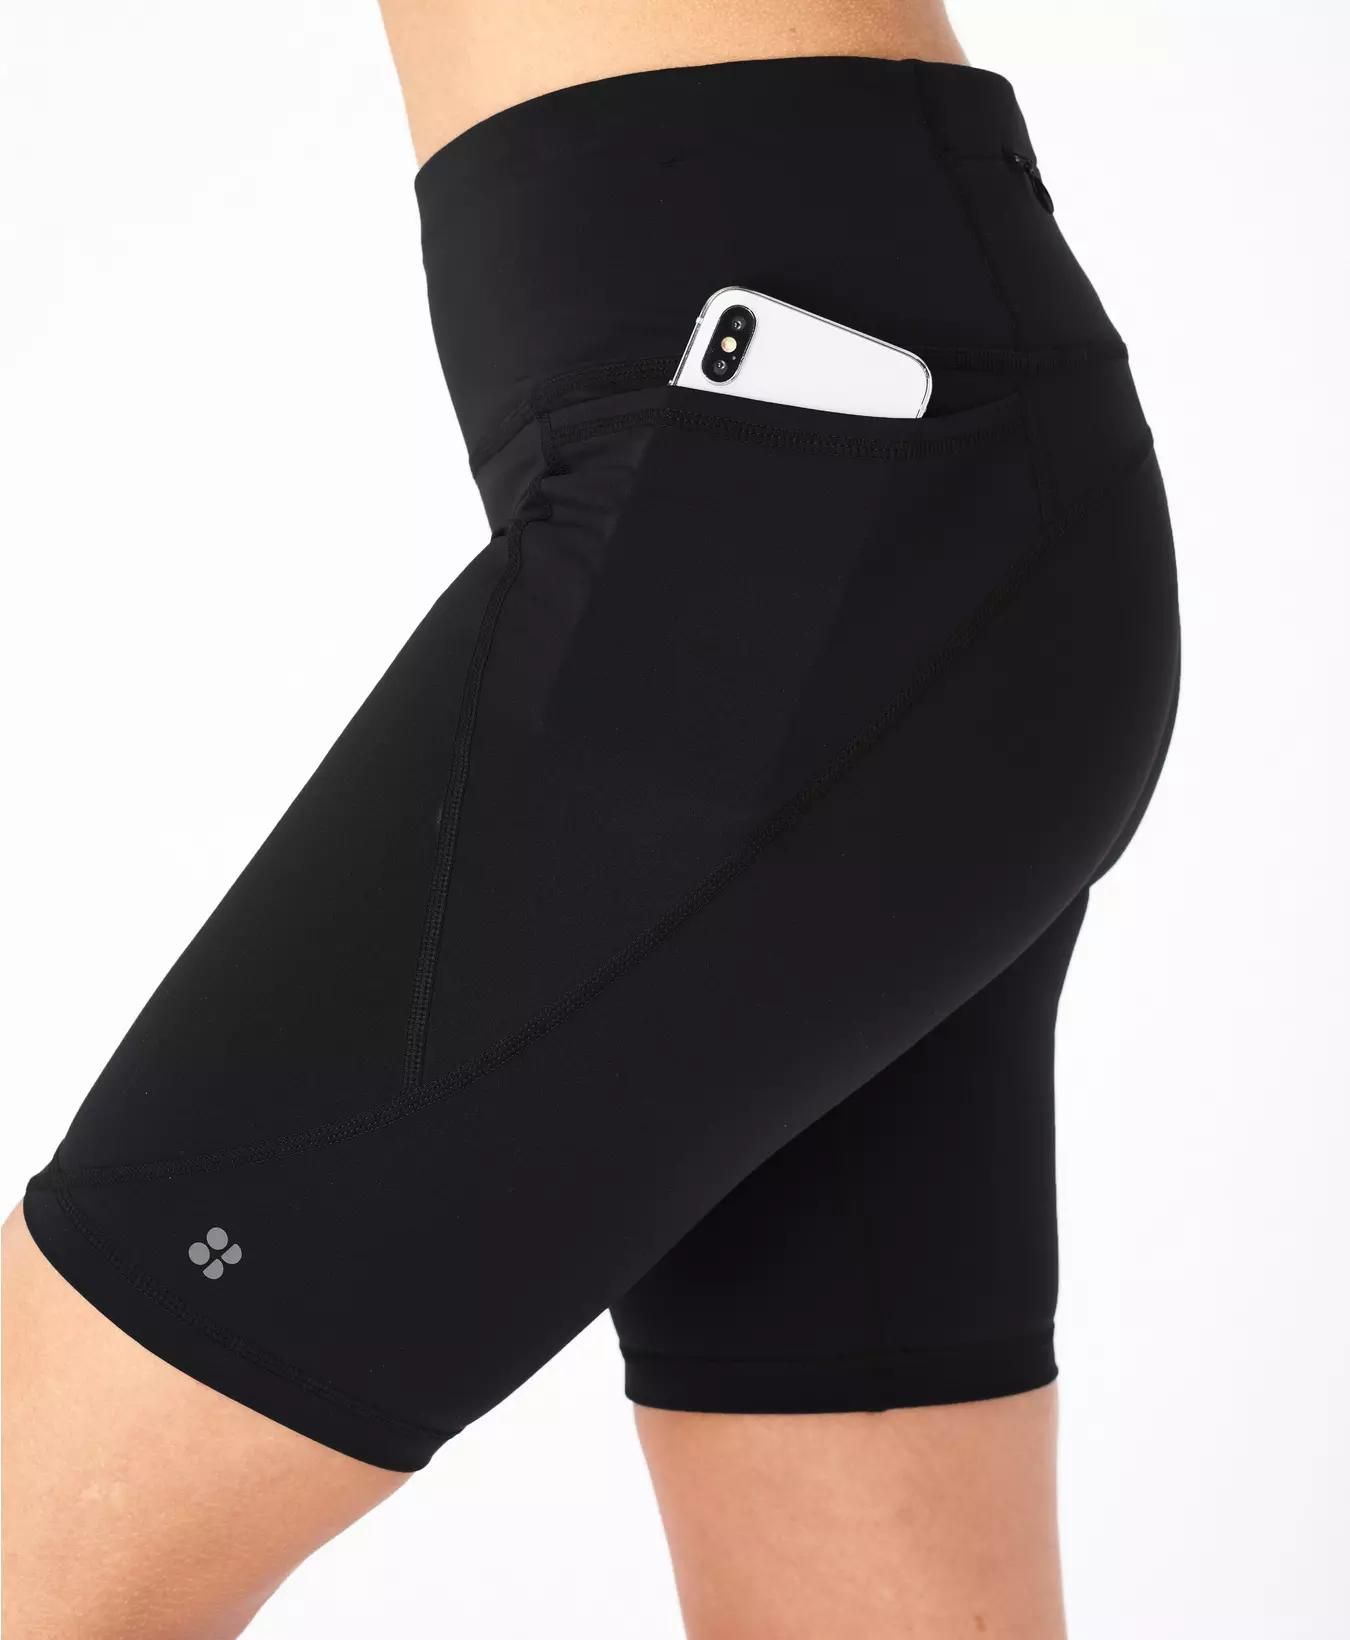 Details about   More Mile Womens Racer Shorts Black 3 Inch Short Running Gym Workout 